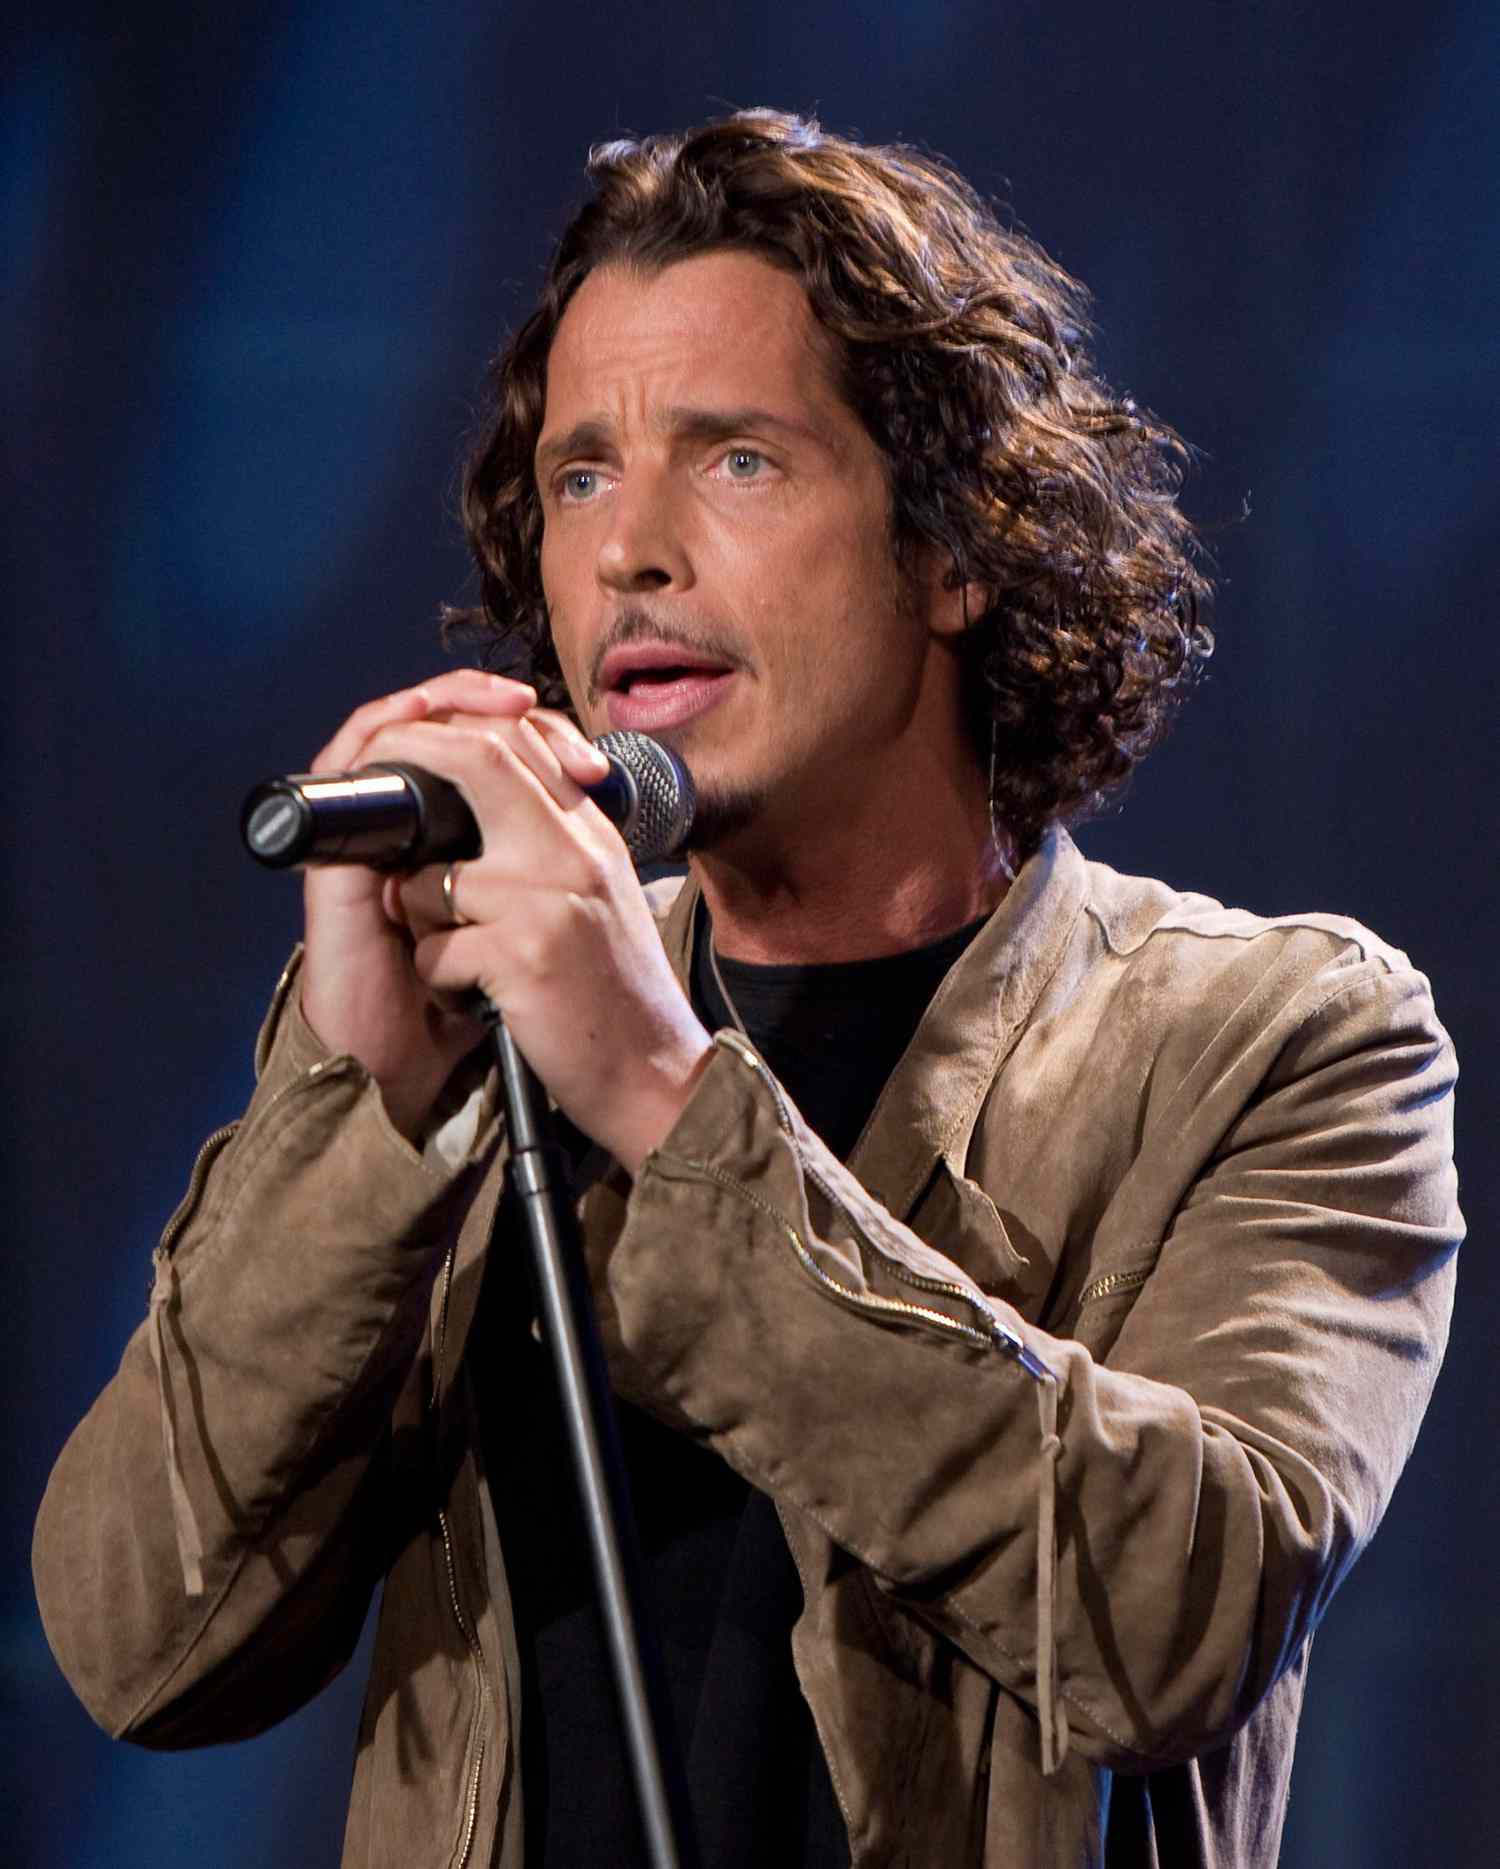 The Tonight Show with Jay Leno - Chris Cornell